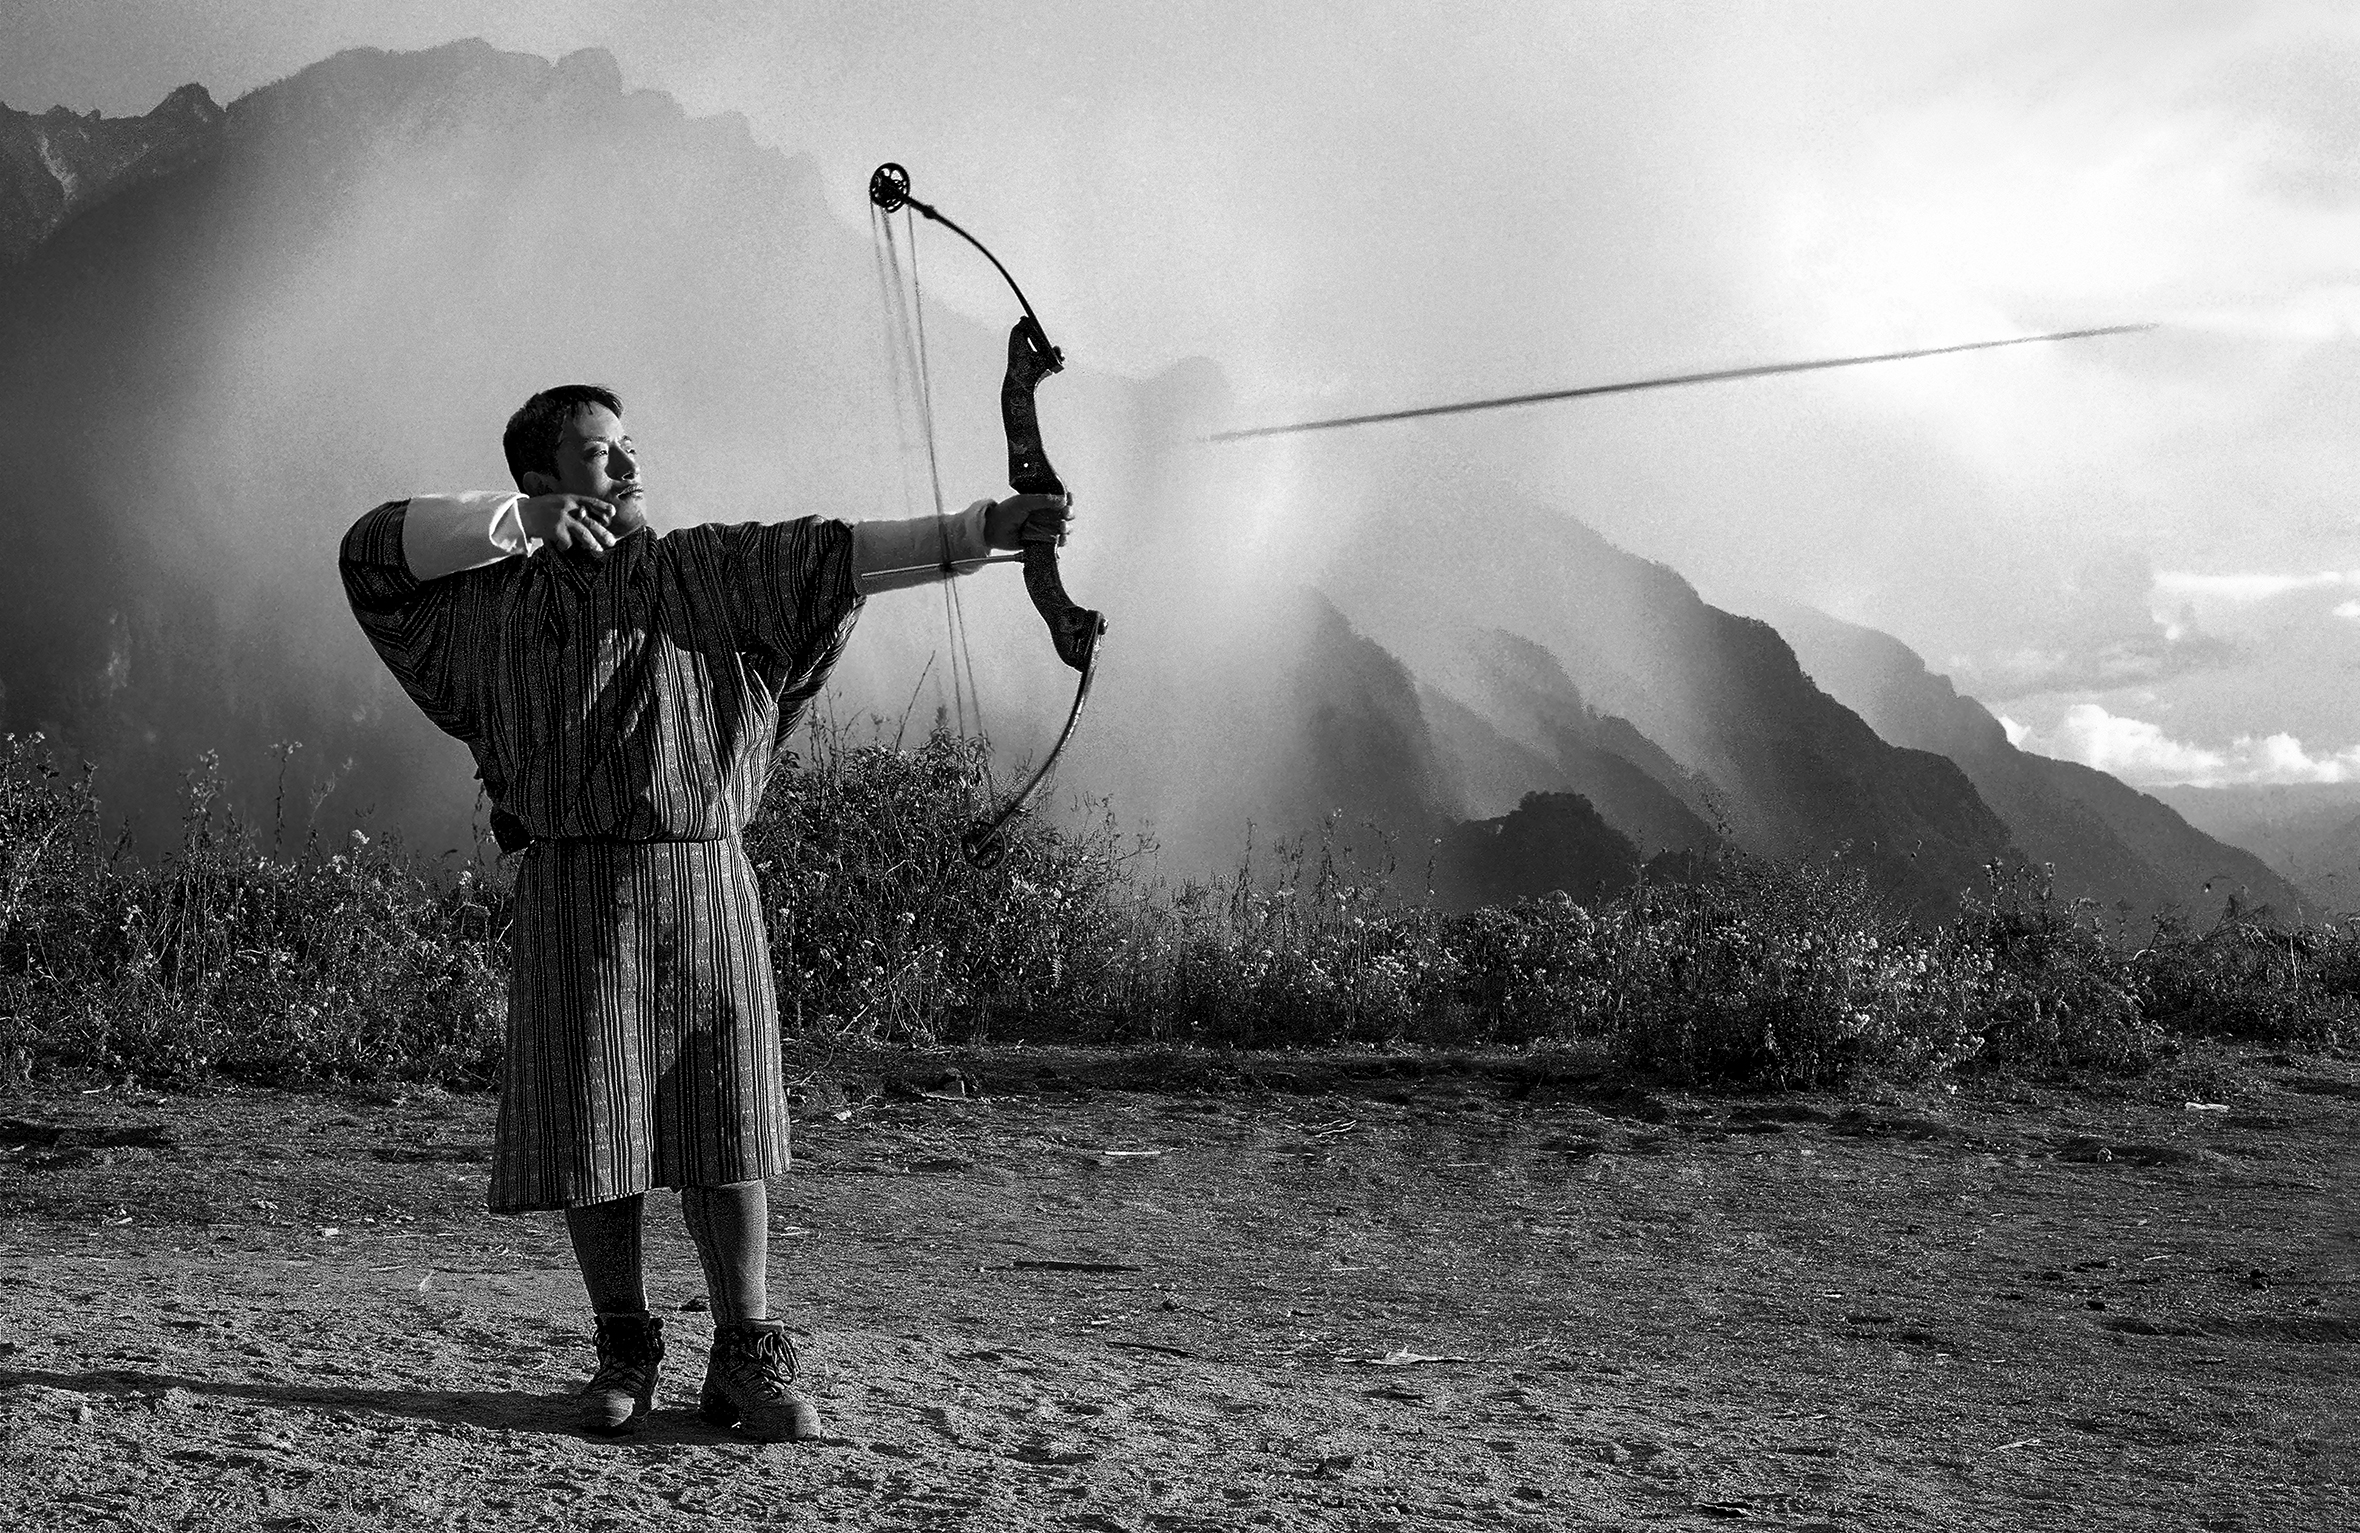 A Bhutanese archer stands among nature with mountains in the distance. He has just let loose an arrow.